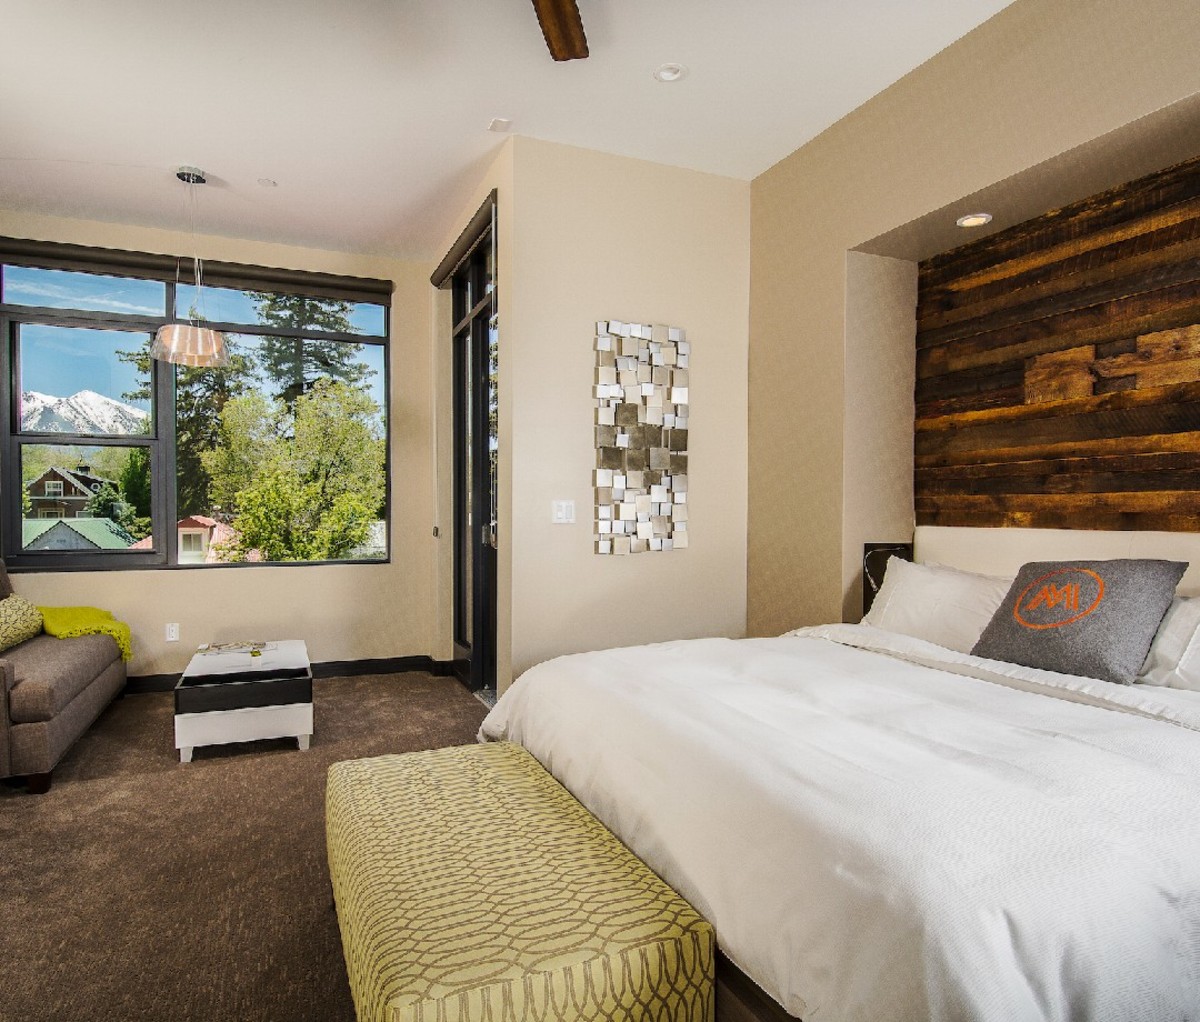 A room at Marble Distilling Co's The Distillery Inn with views of the Colorado mountains.